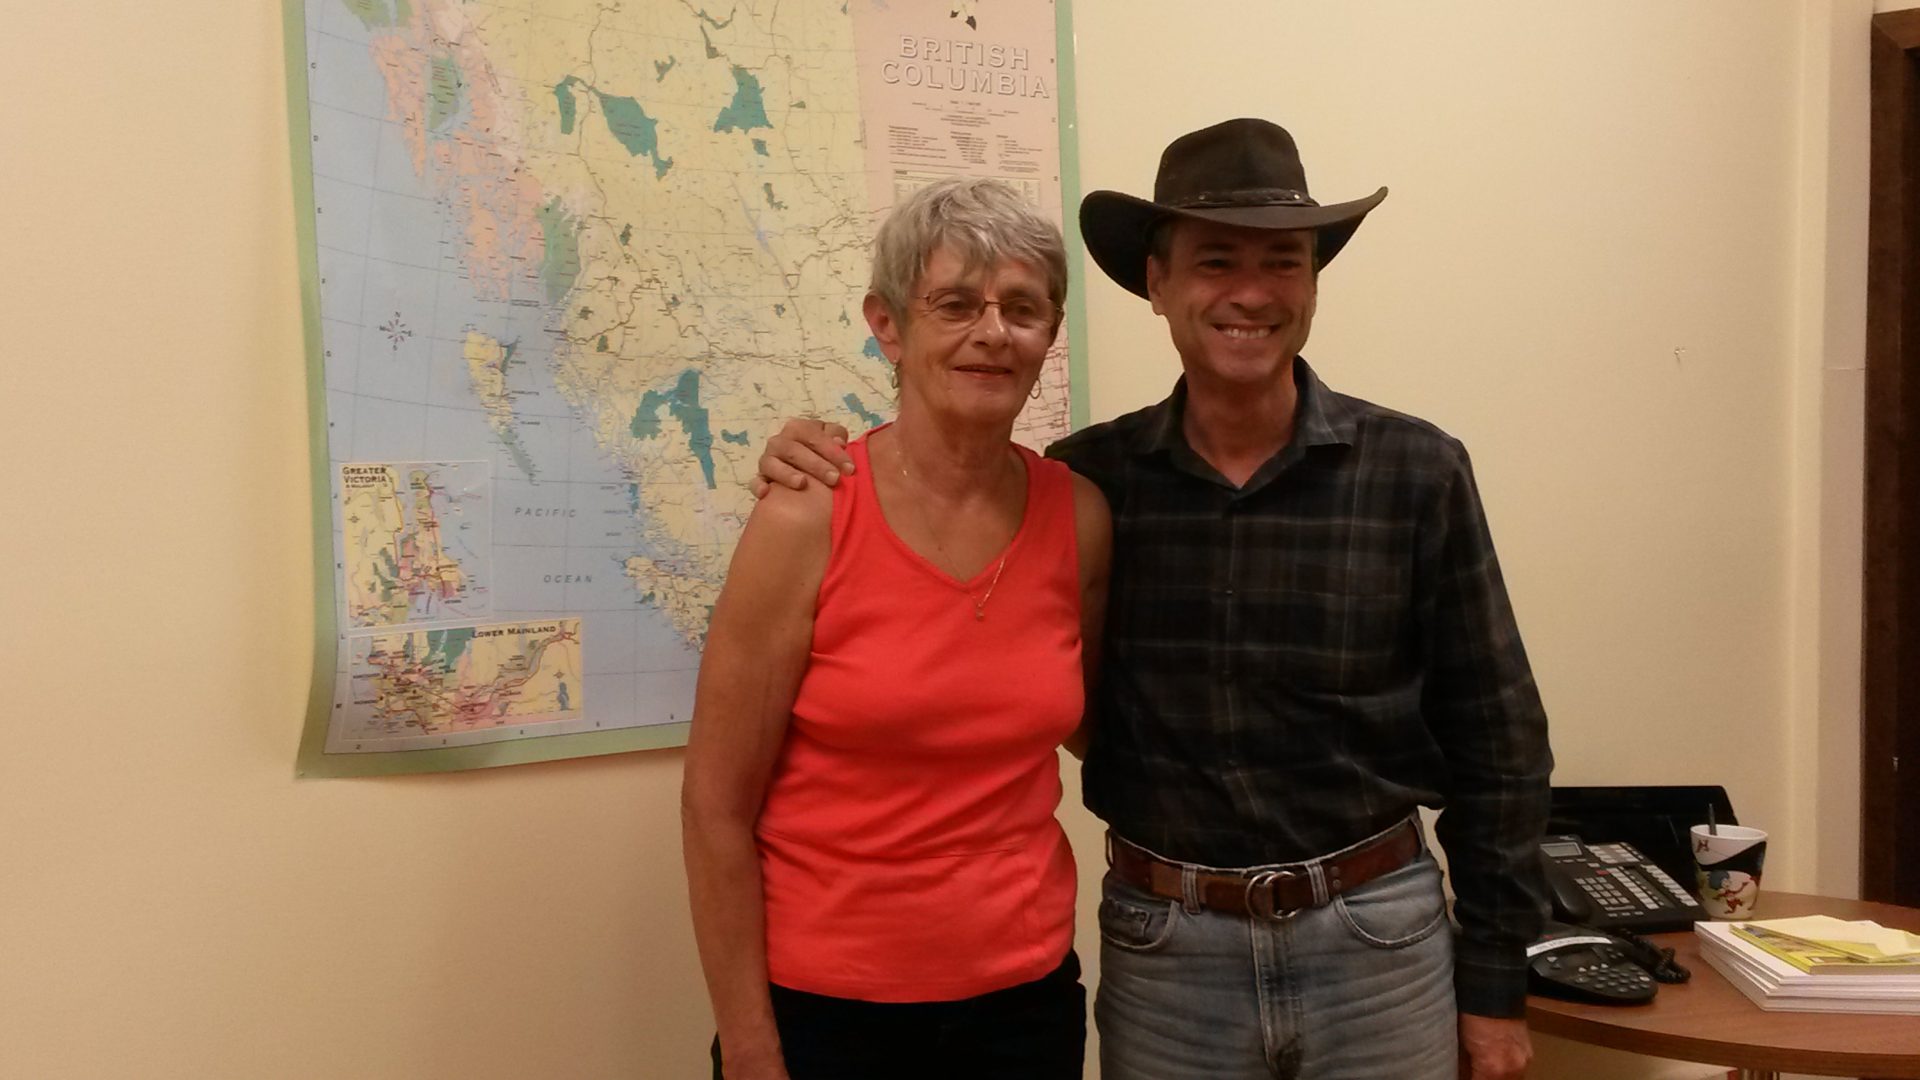 Minister of Agriculture Passes Through Cariboo, Hears Ranchers Concerns